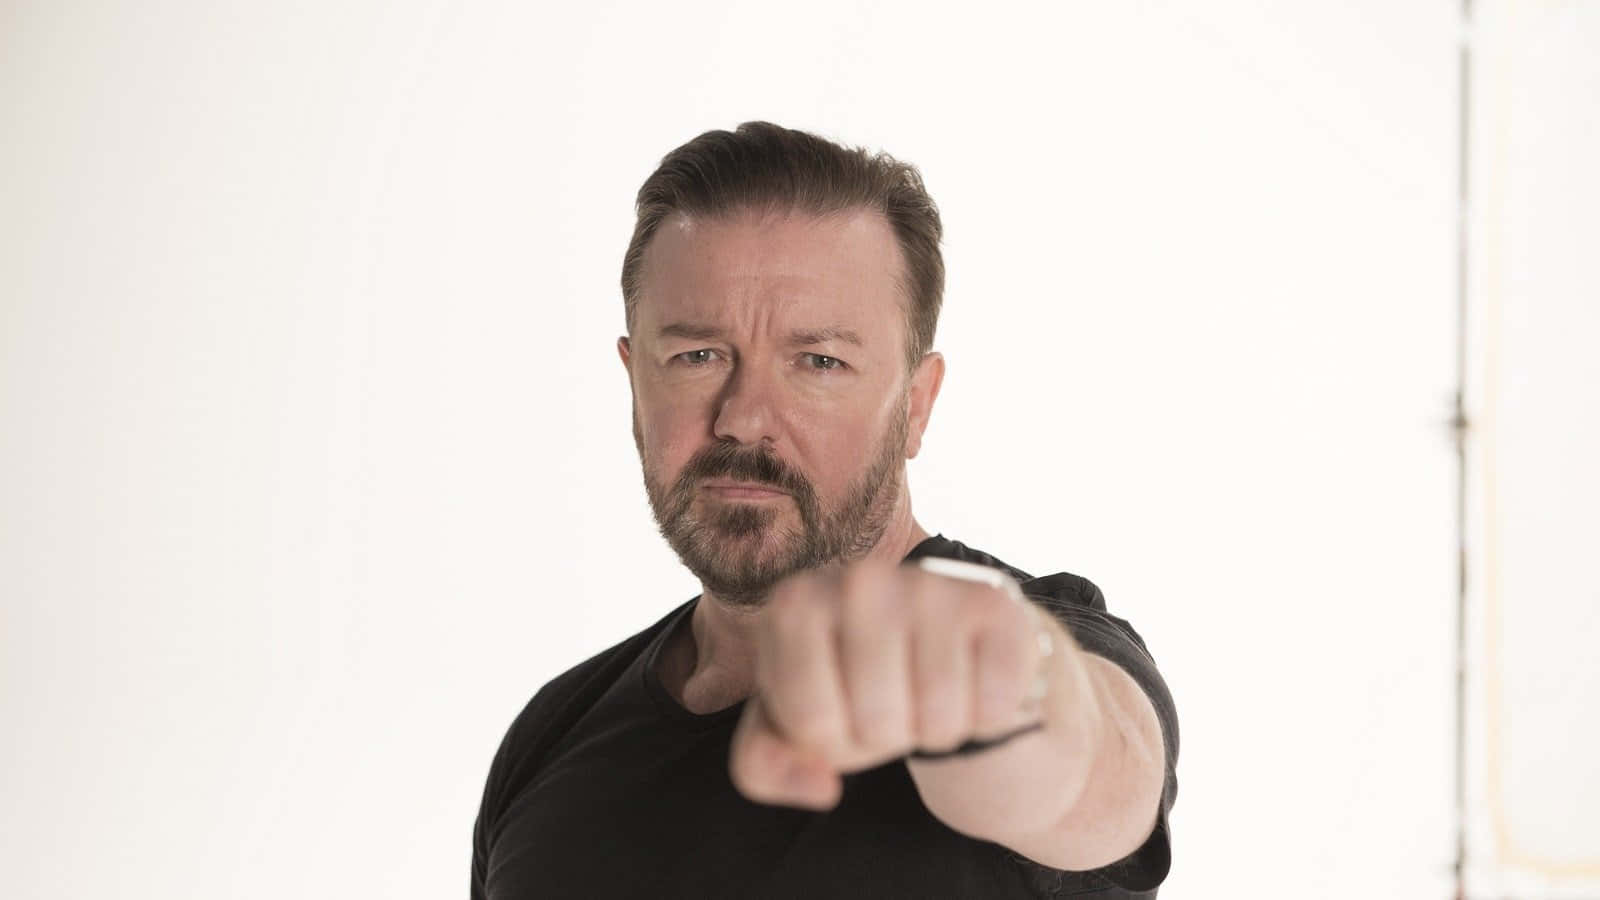 Iconic Stand-up Comedian Ricky Gervais in an Intimate Moment Wallpaper